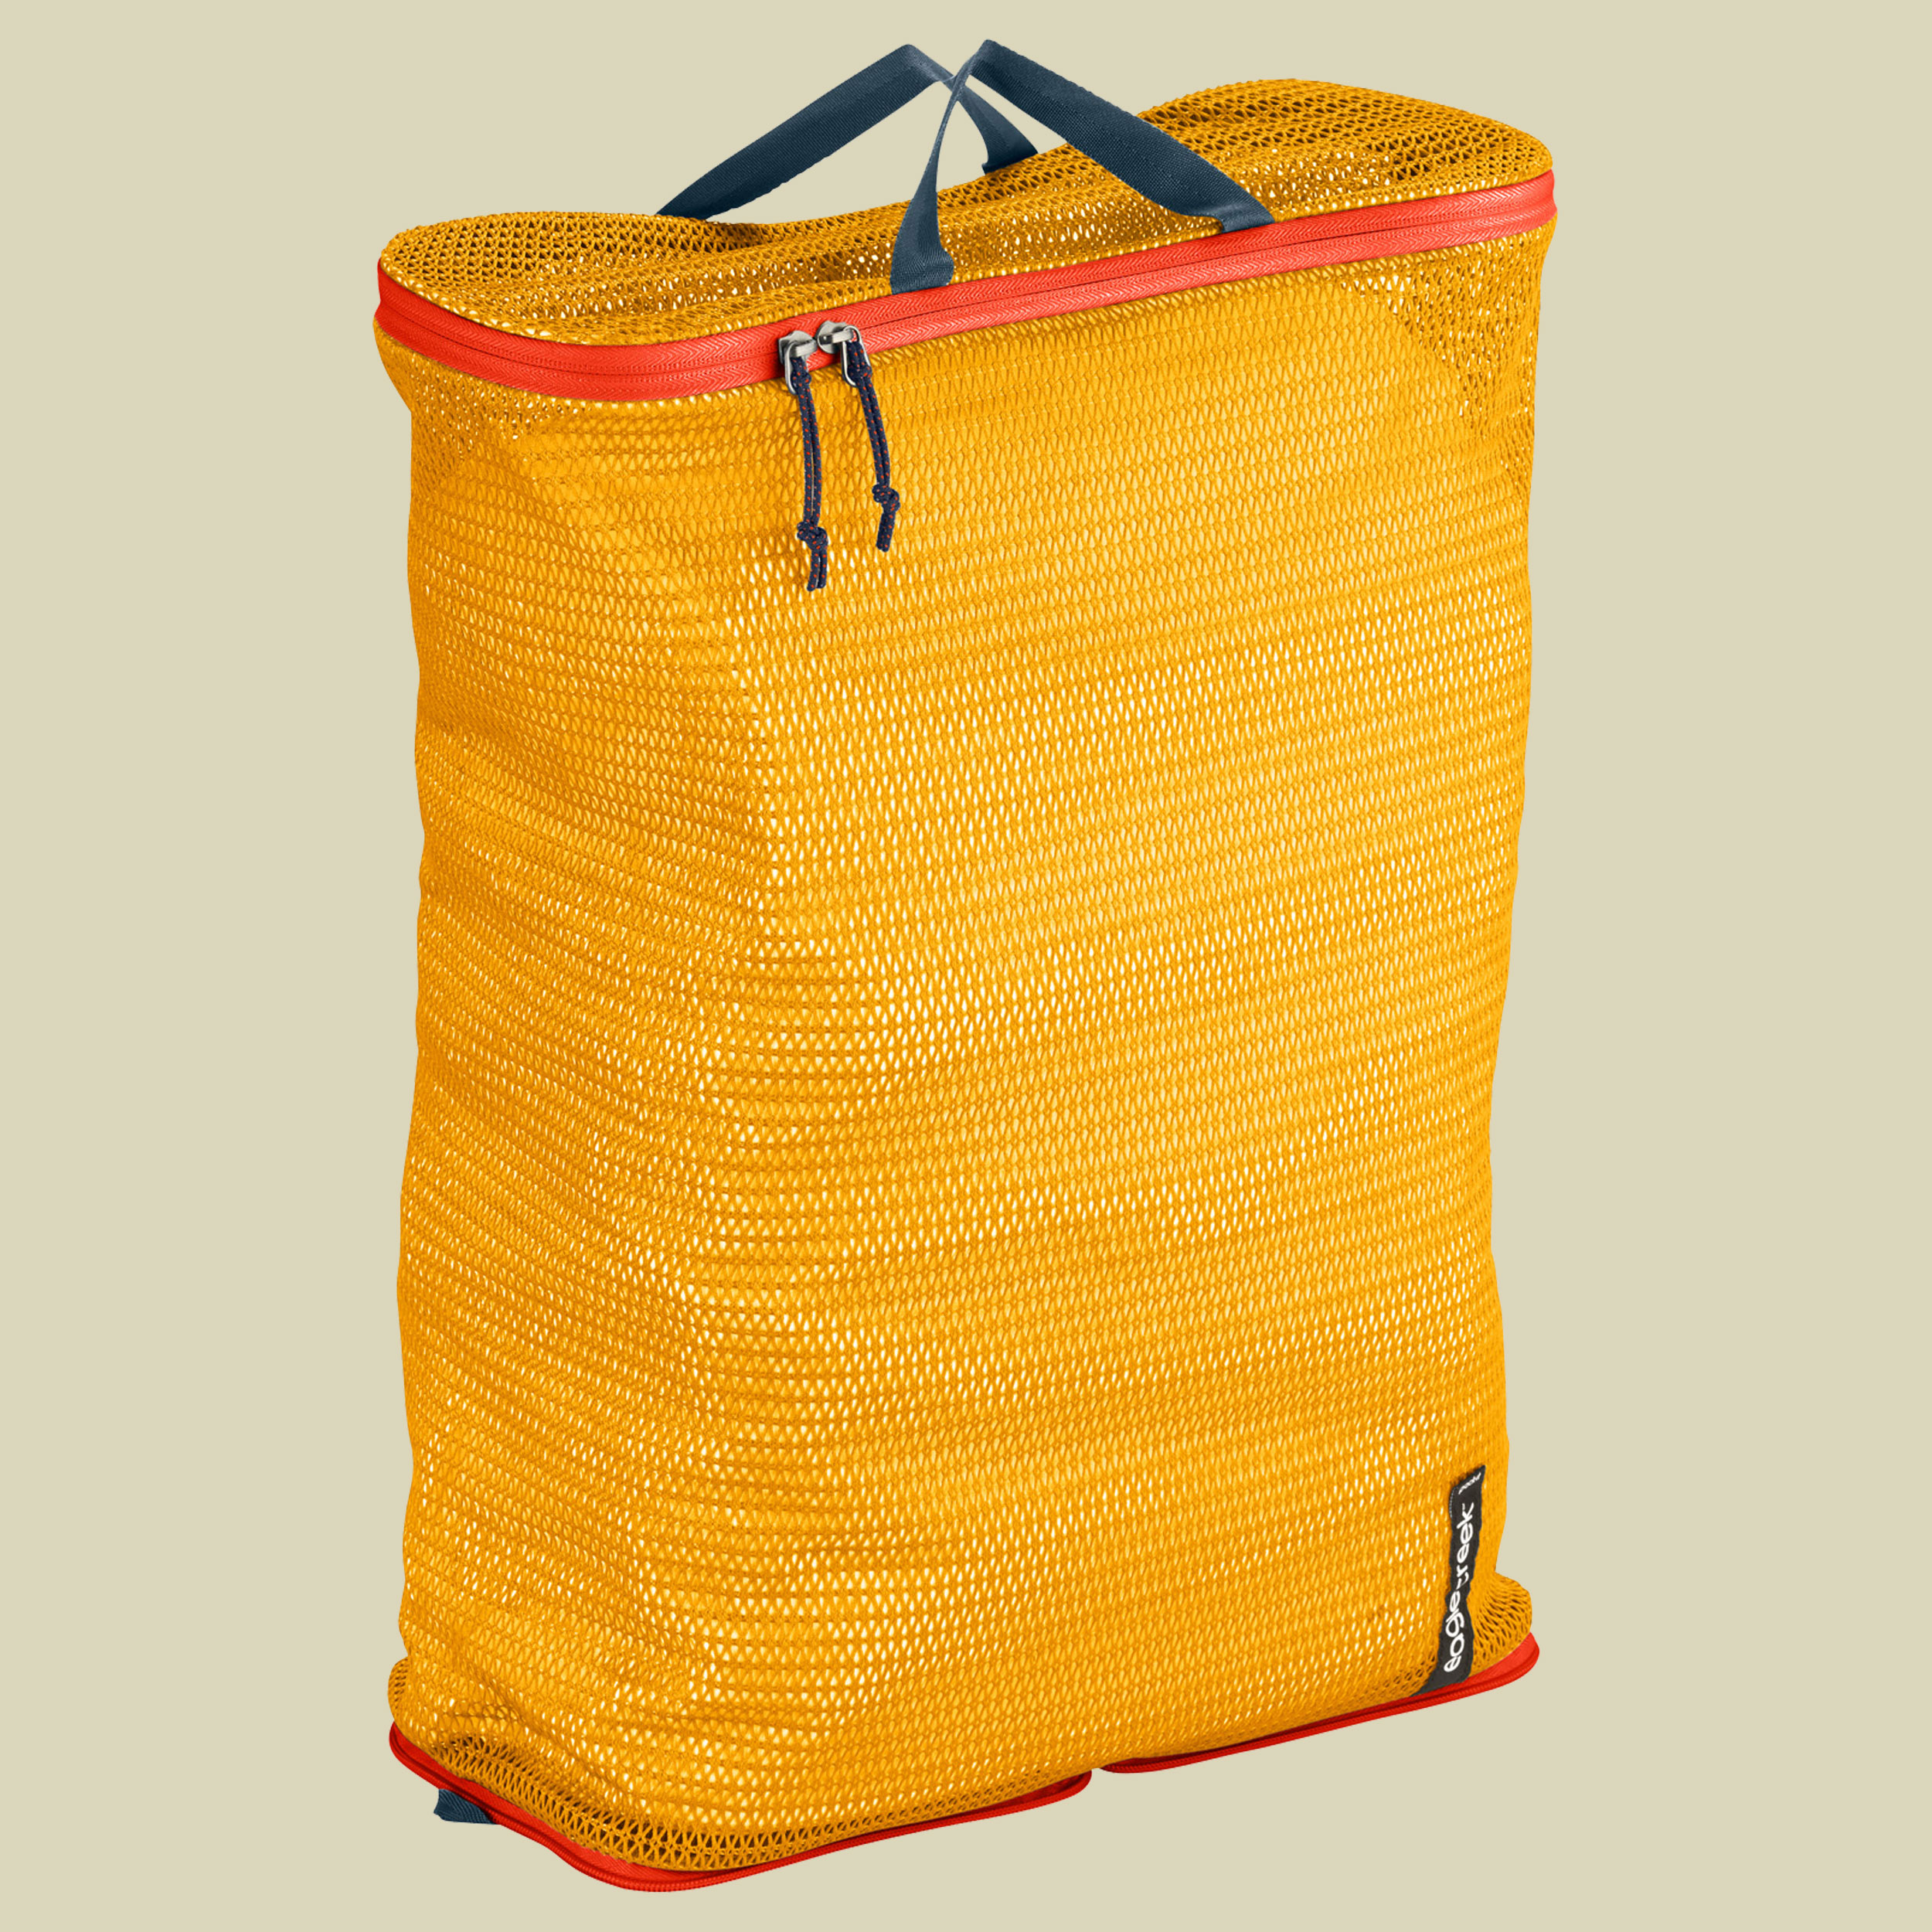 Pack-It Reveal Laundry Sac